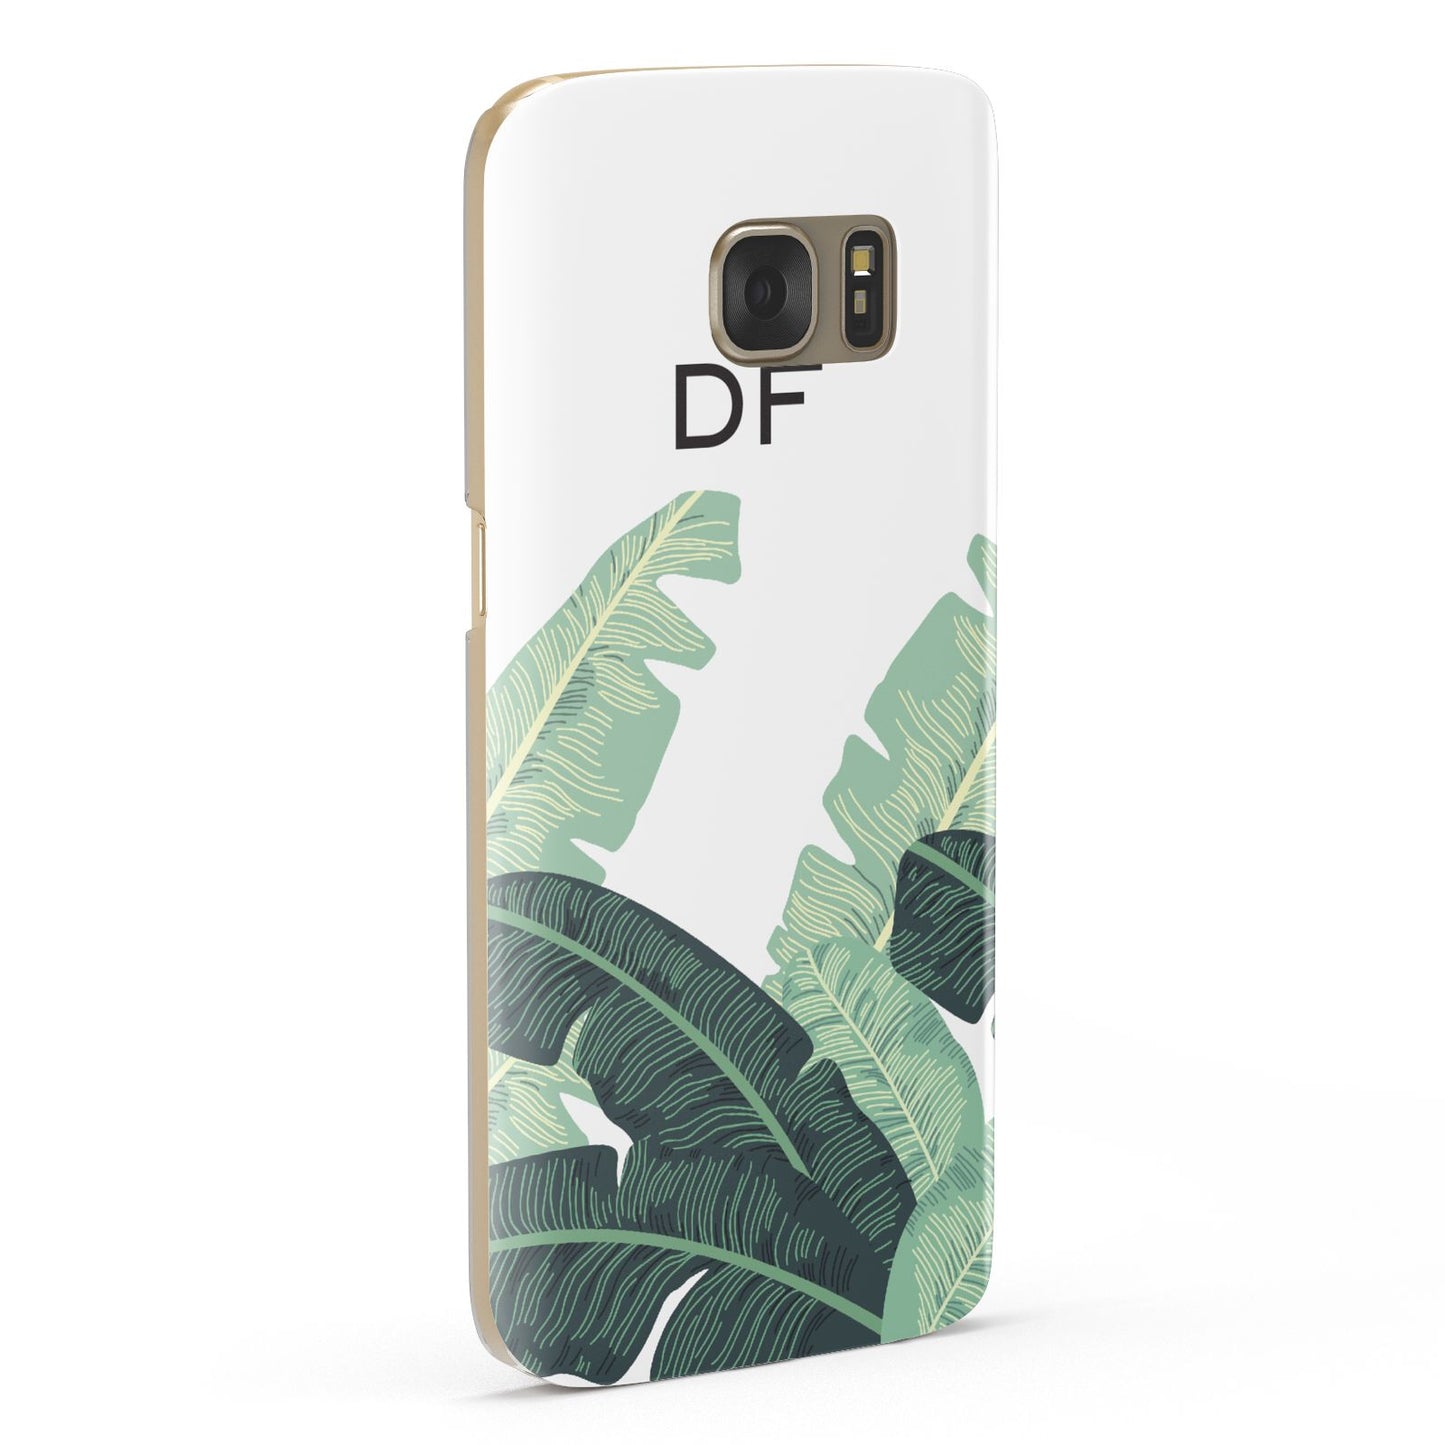 Personalised White Banana Leaf Samsung Galaxy Case Fourty Five Degrees